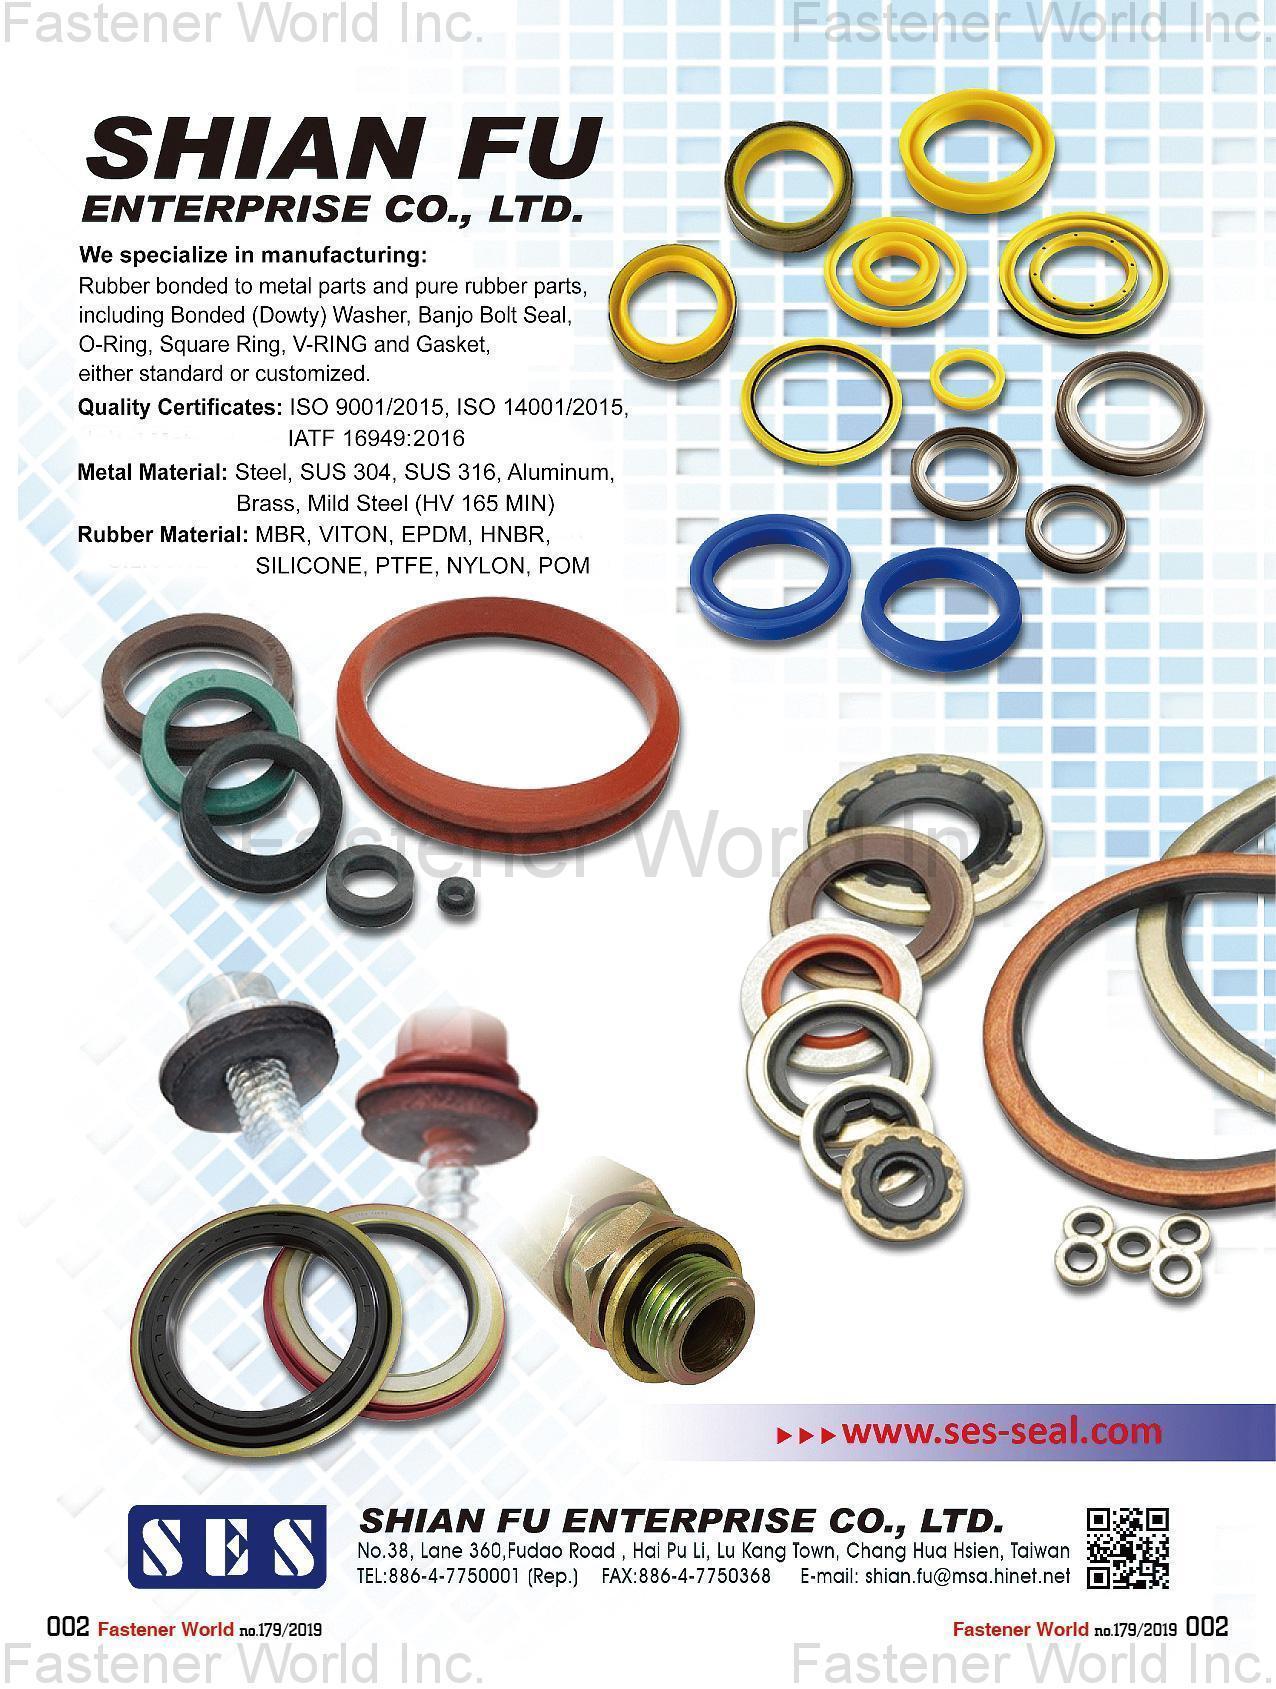 SHIAN FU ENTERPRISE CO., LTD. , Rubber bonded to metal parts, pure rubber parts, including Bonded (Dowty) Washer, Banjo Bolt Seal, O-ring, Square Ring, V-Ring, Gasket , Sealing Washers